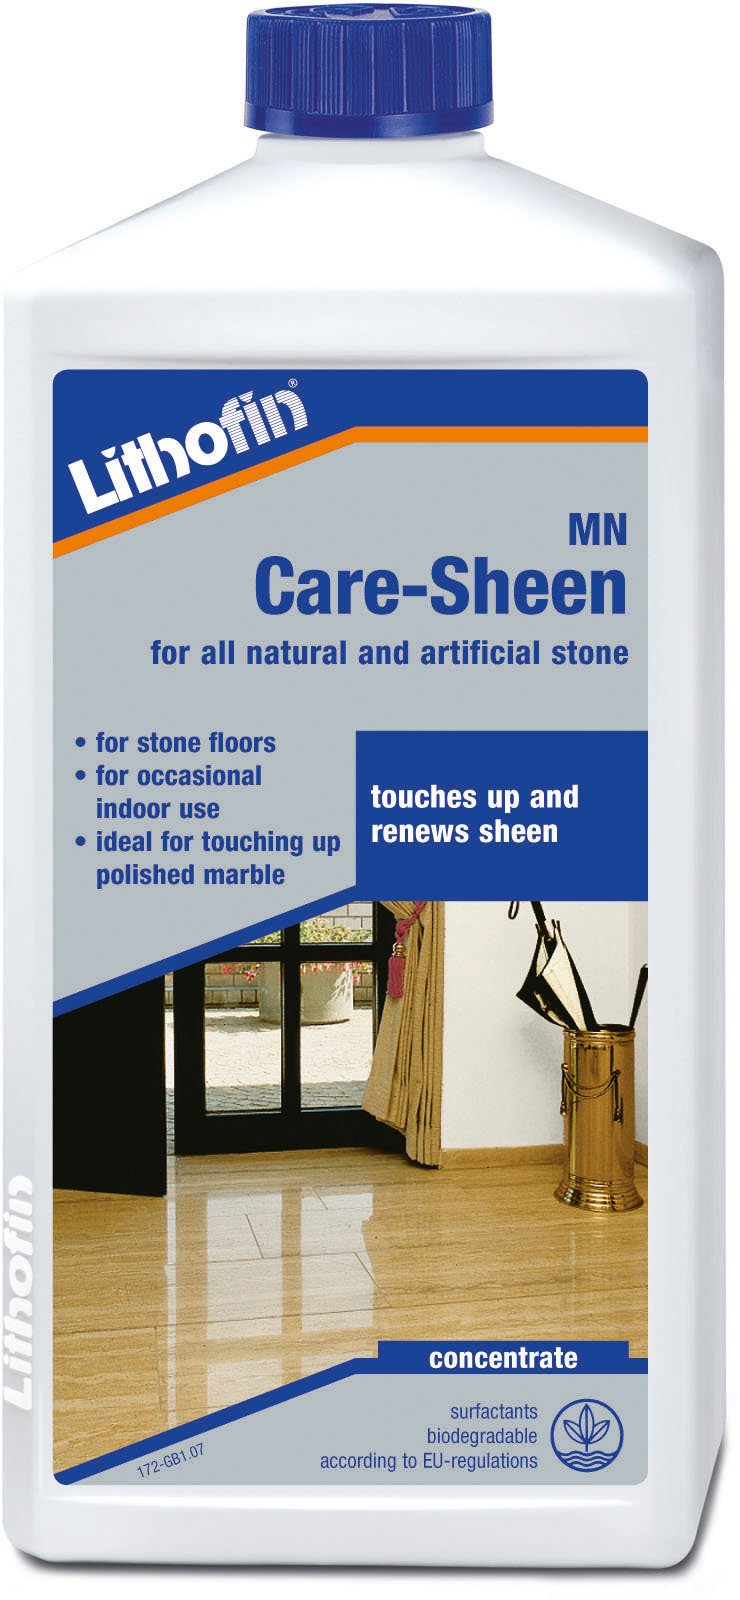 Lithofin Care Sheen for all natural and artificial stone